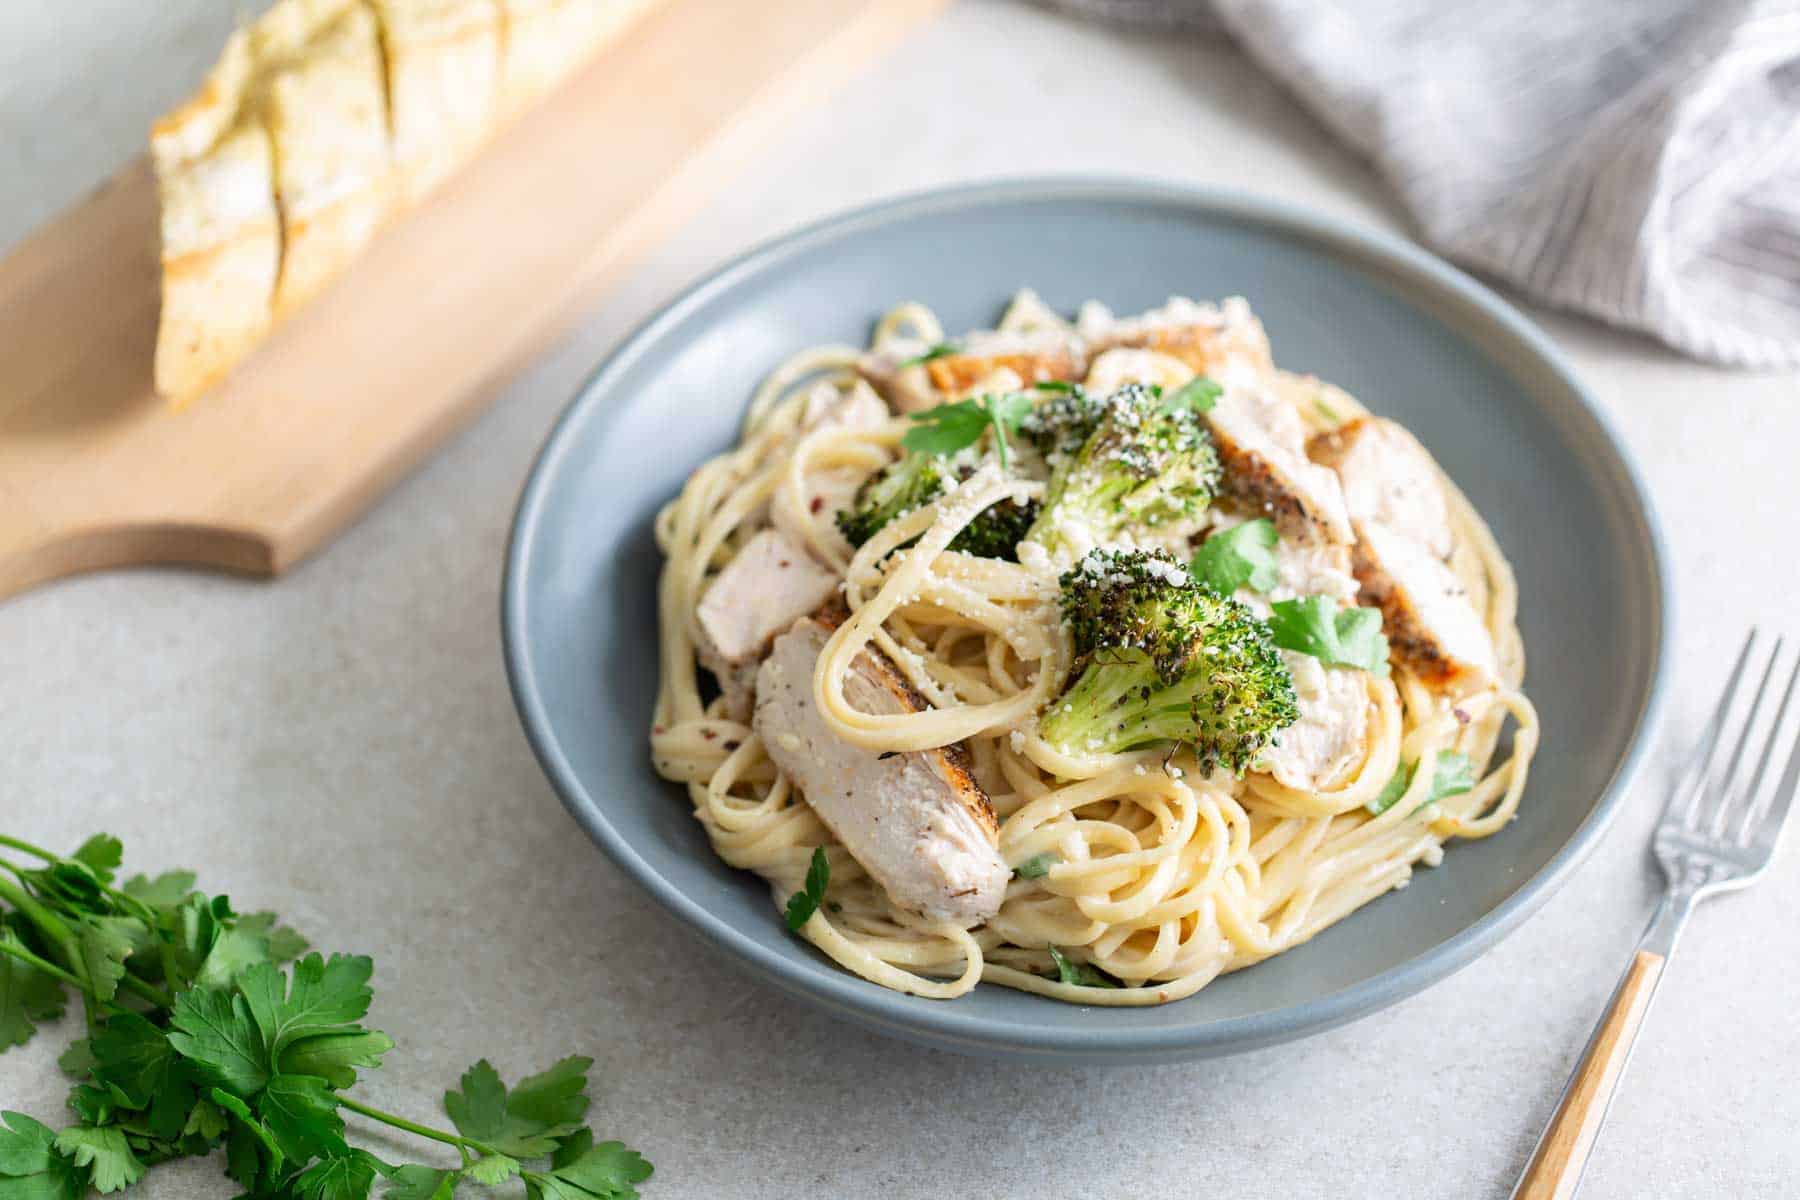 A bowl of pasta with chicken and broccoli.